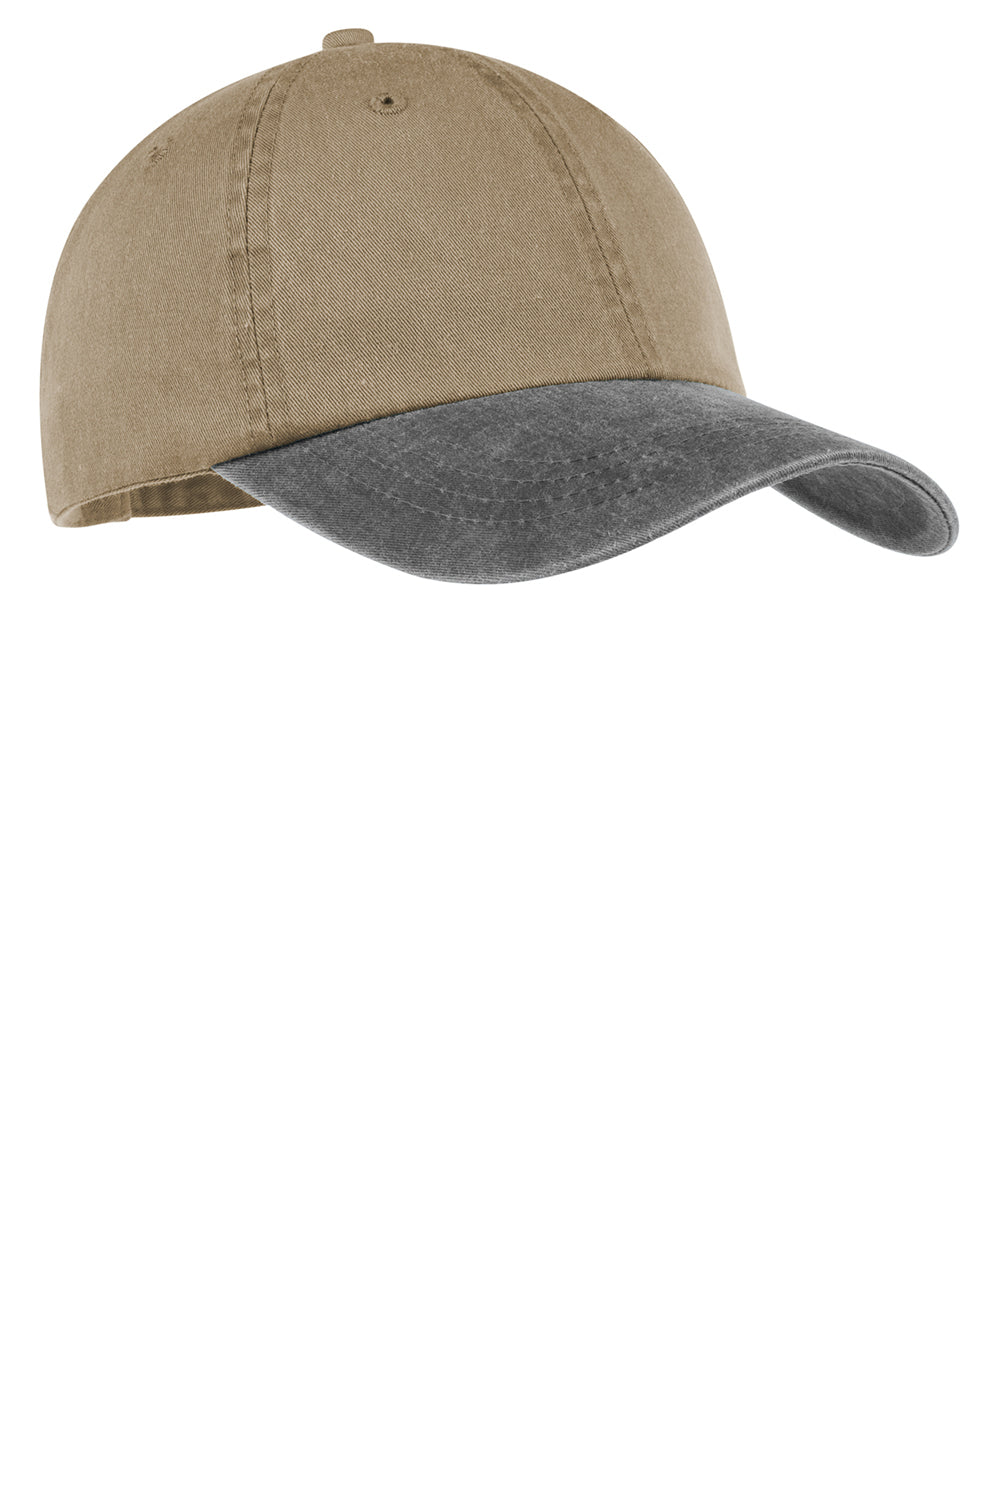 Port & Company CP83 Mens Adjustable Hat Khaki Brown/Charcoal Grey Front